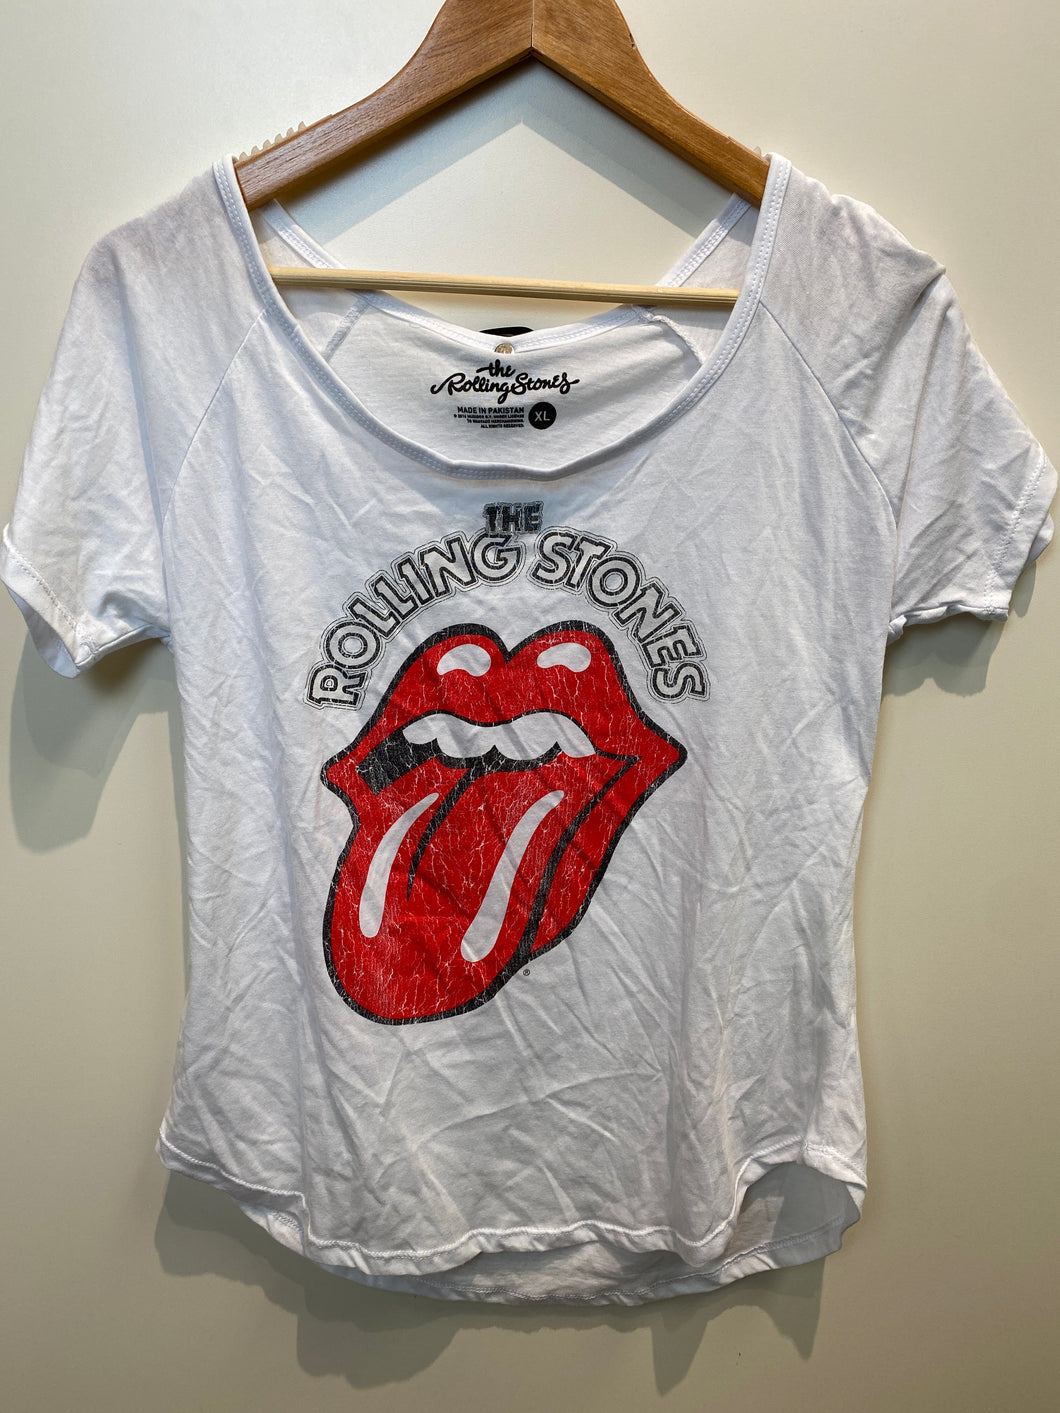 Rolling Stones Womens T-Shirt Size Extra Large